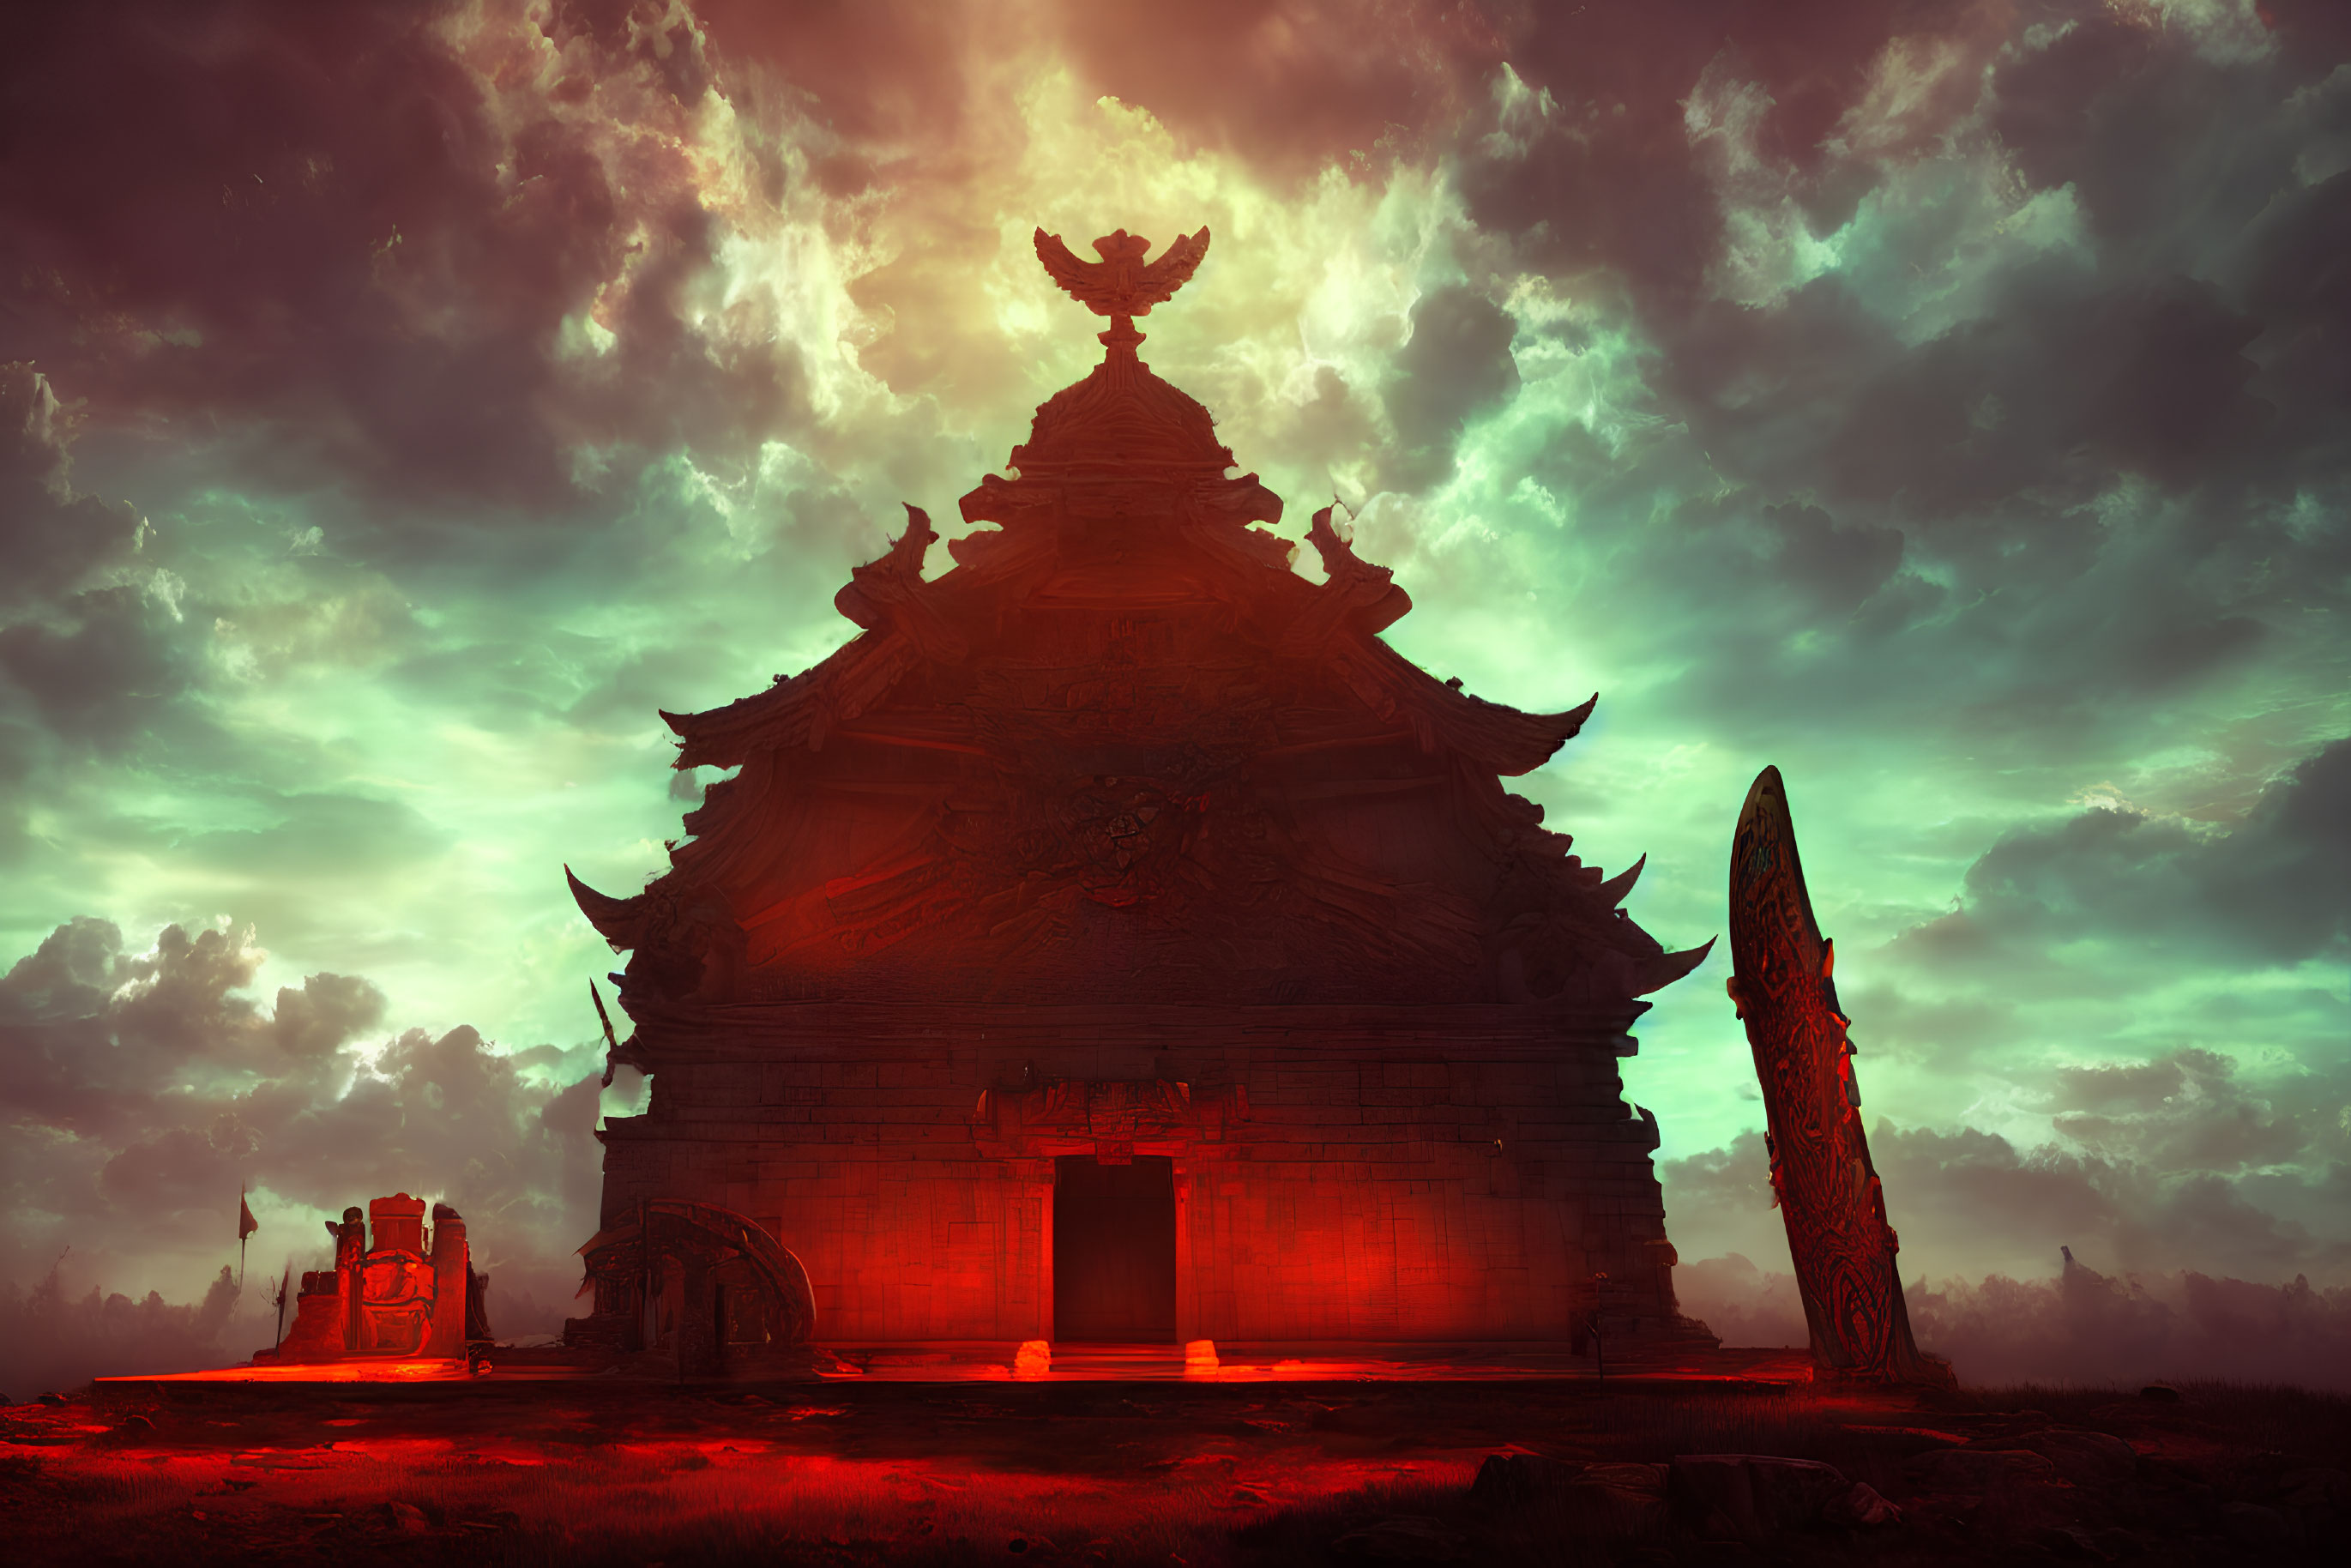 Ancient temple with intricate designs under a dramatic red sky